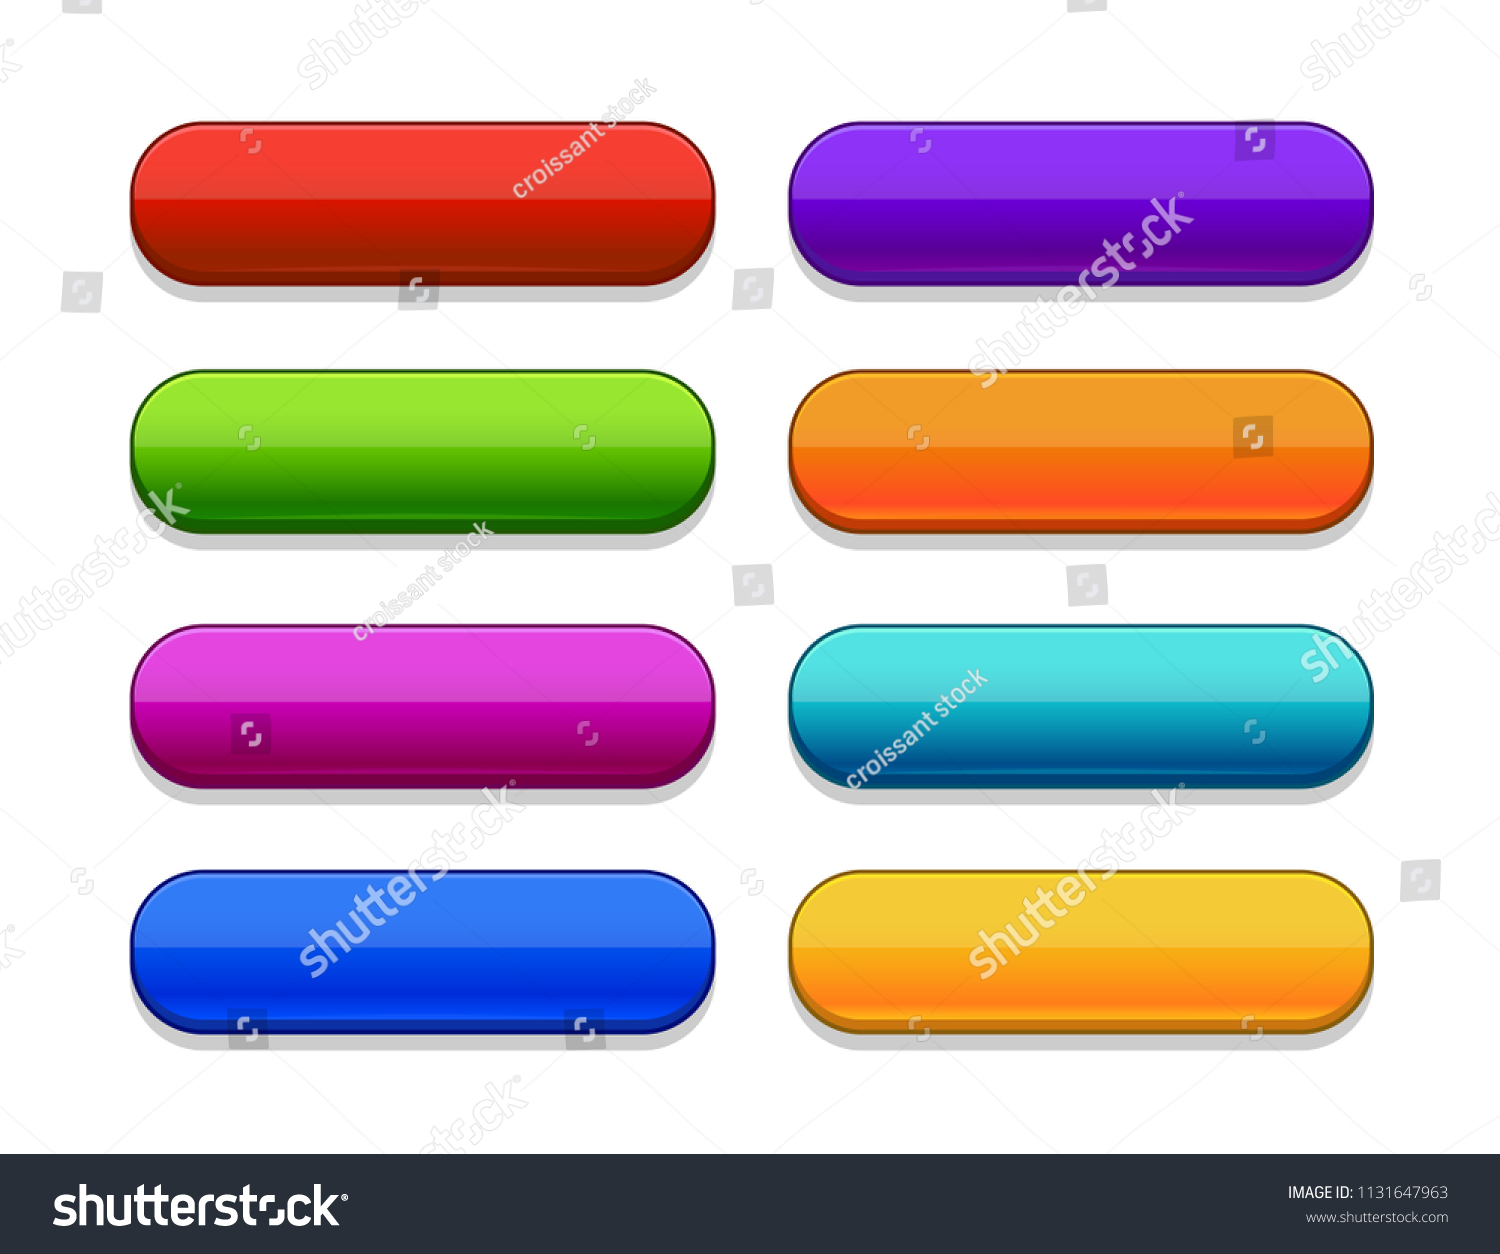 Game Ui Set Buttons Gui Build Stock Vector (Royalty Free) 1131647963 ...